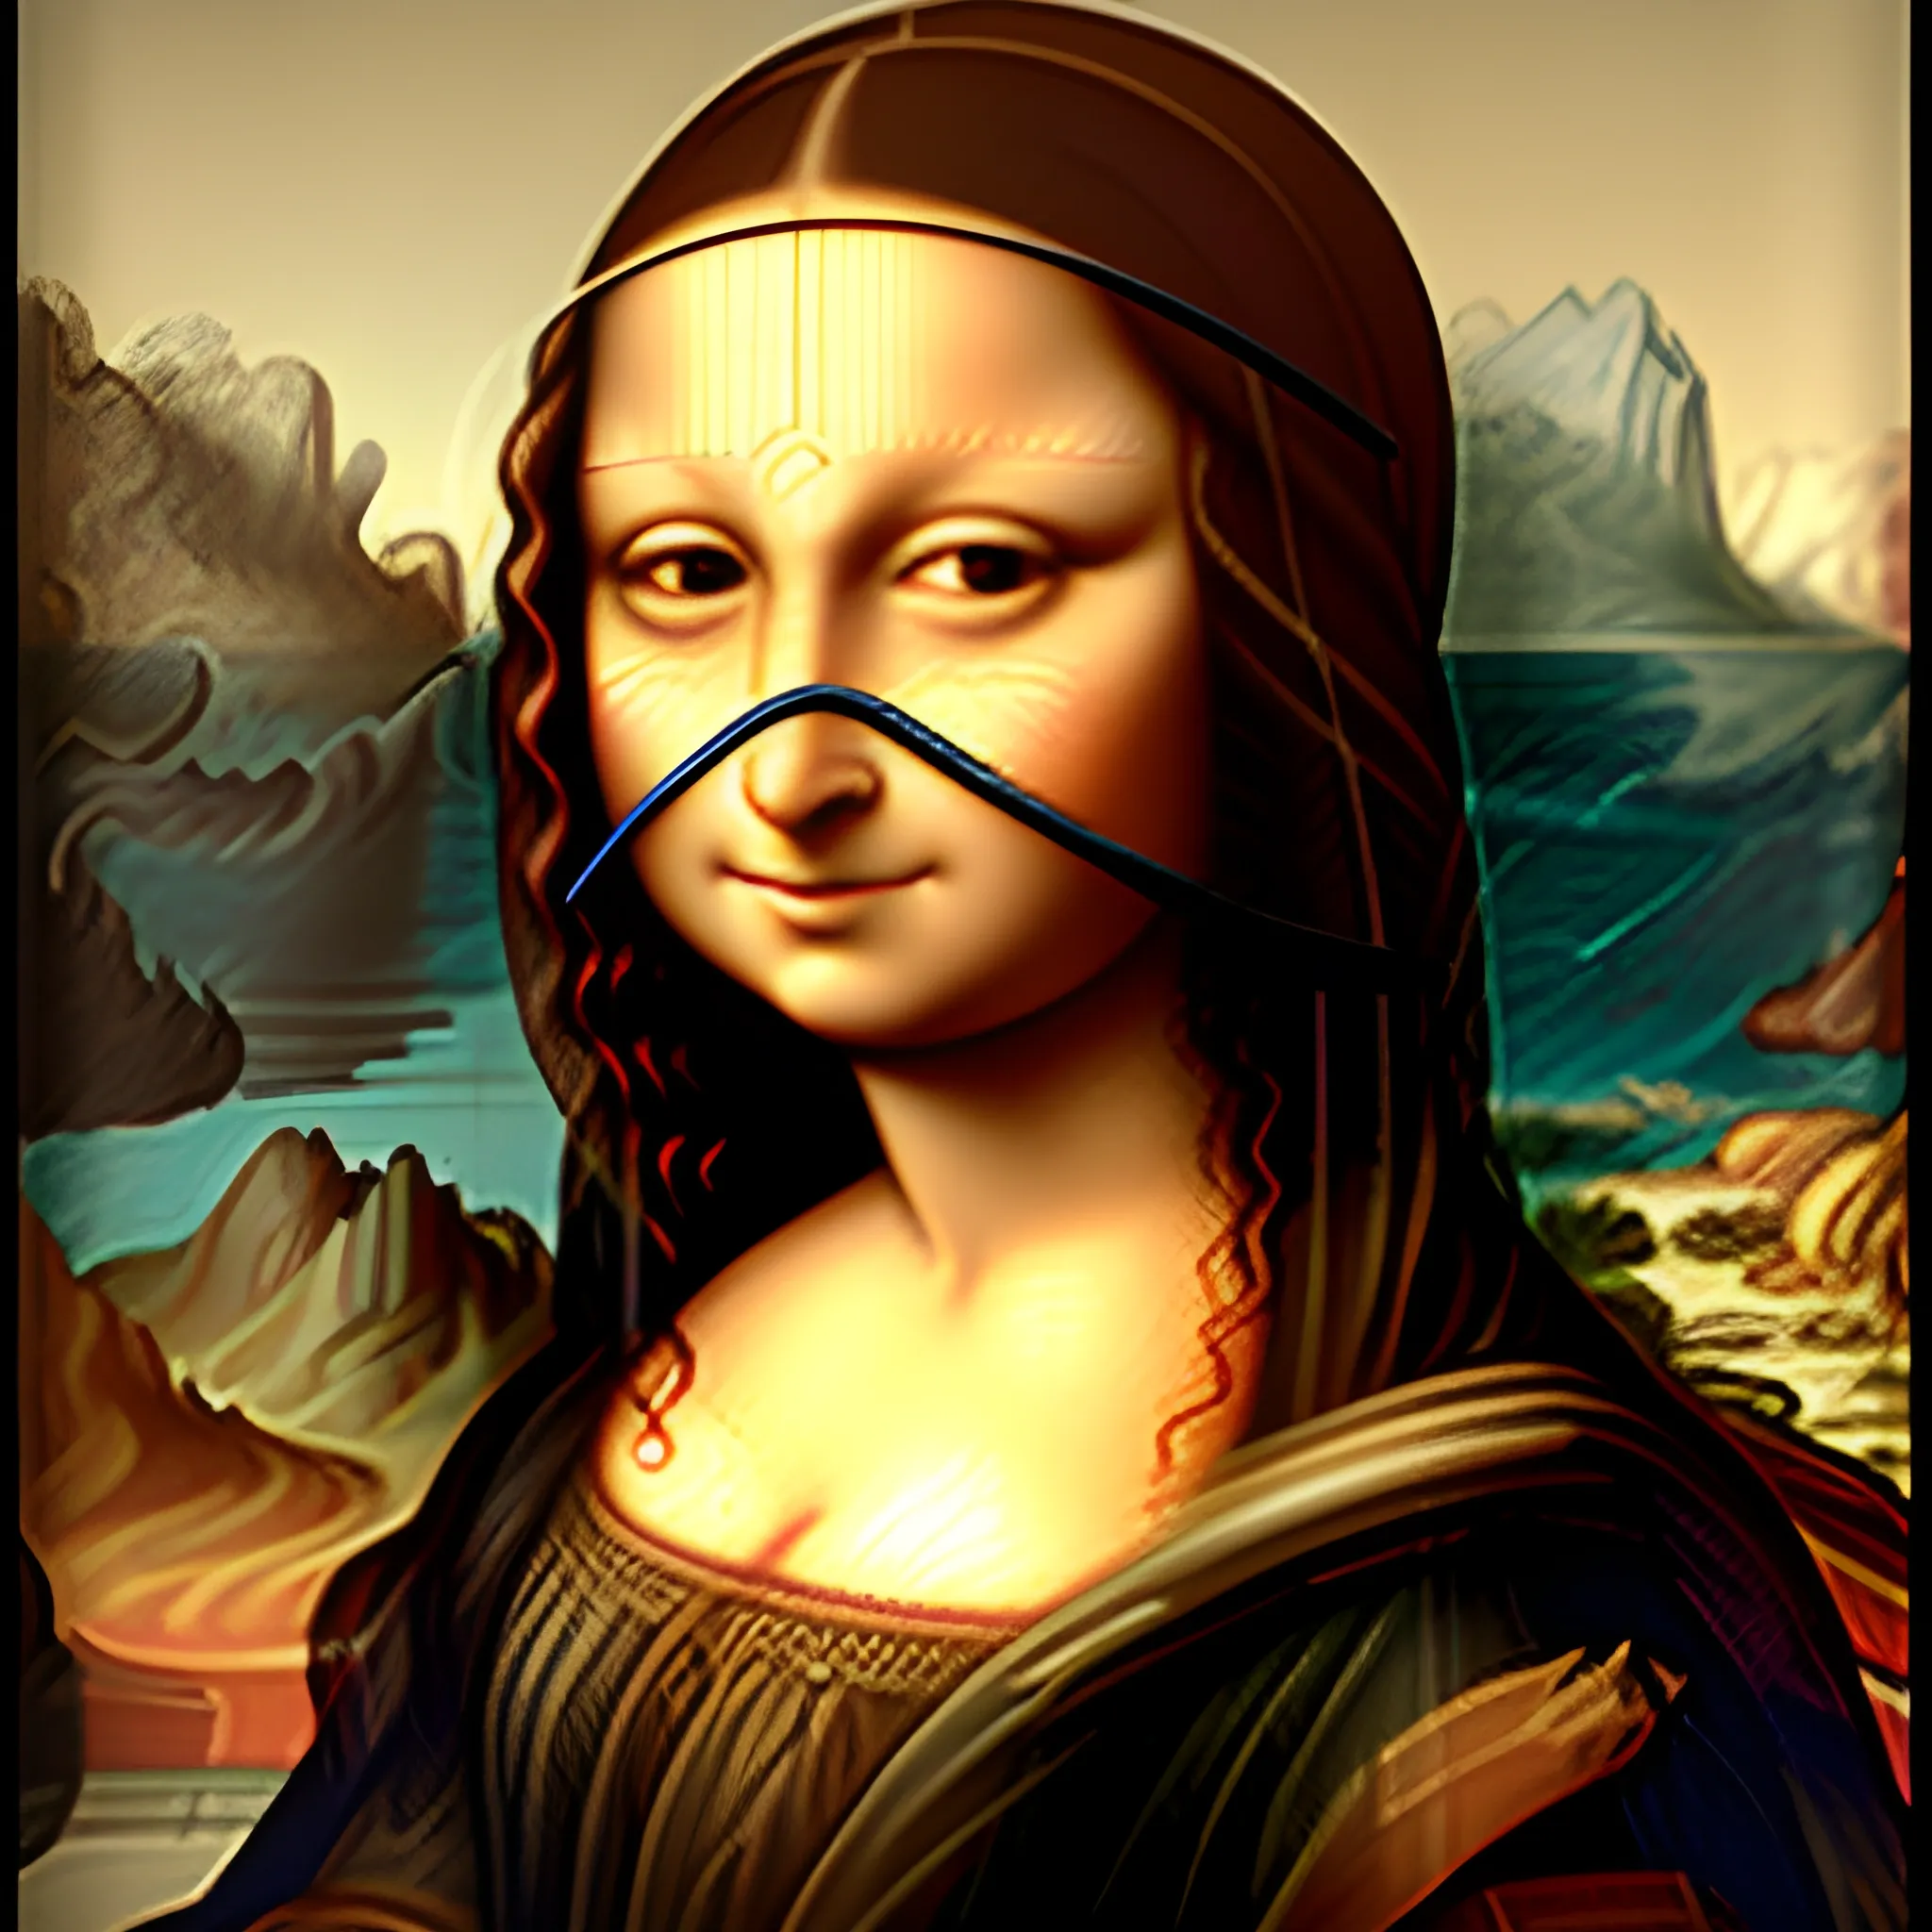 Generate an image of the Mona Lisa adapted with the head of a fu